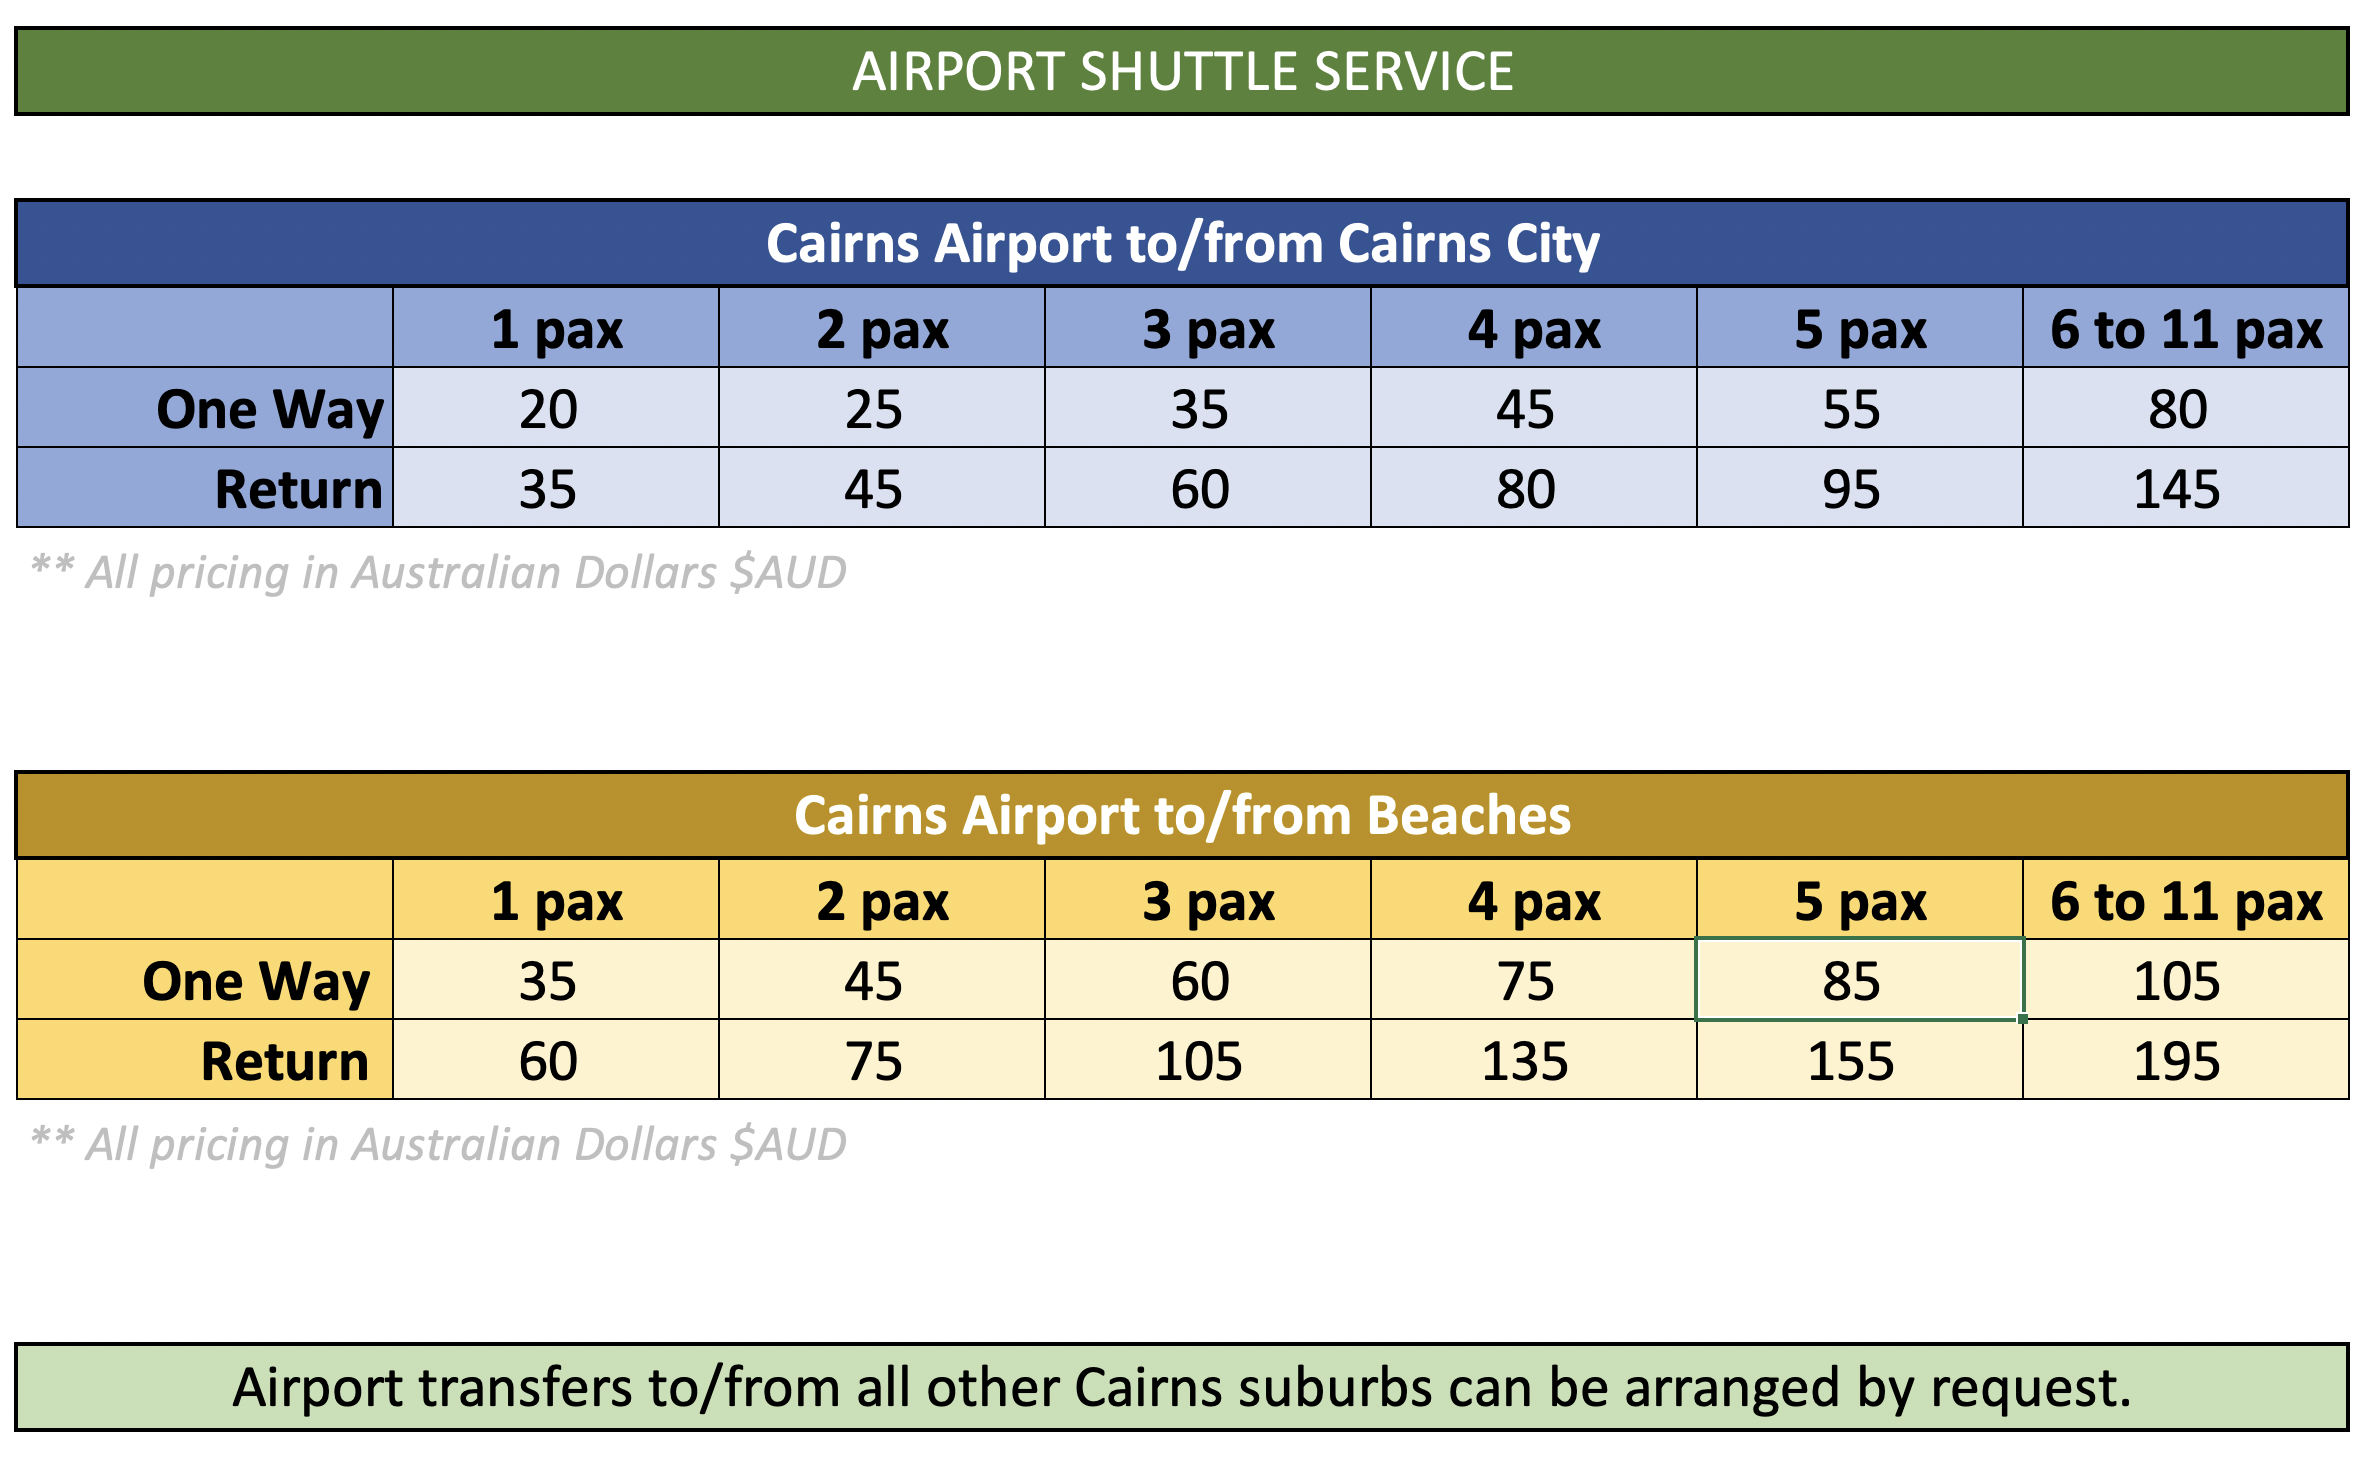 Cairns Airport Shuttle Service - Prices